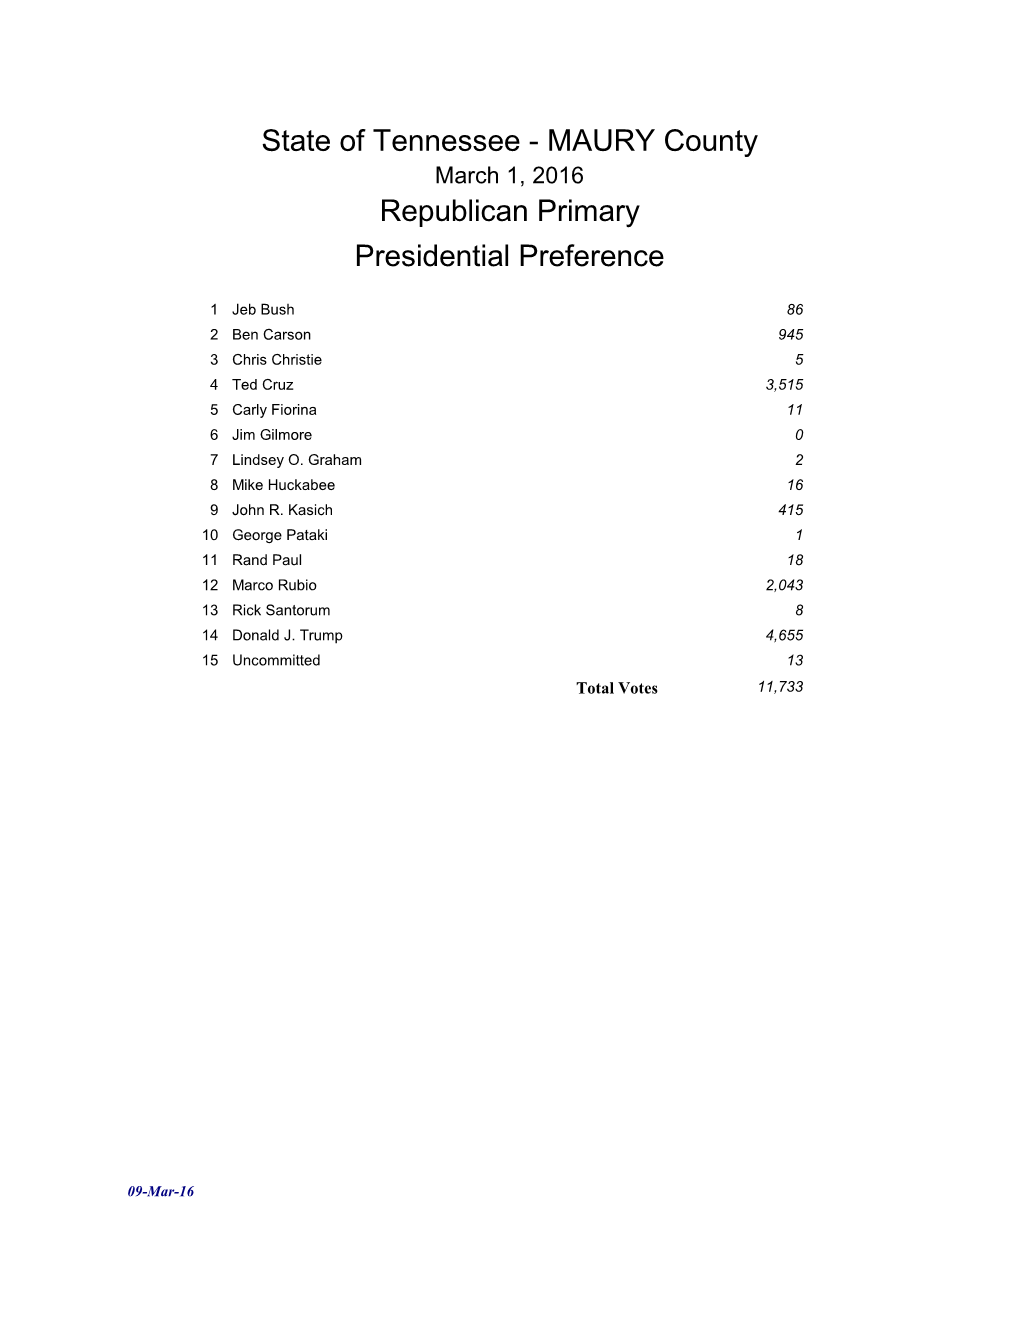 State of Tennessee - MAURY County March 1, 2016 Republican Primary Presidential Preference